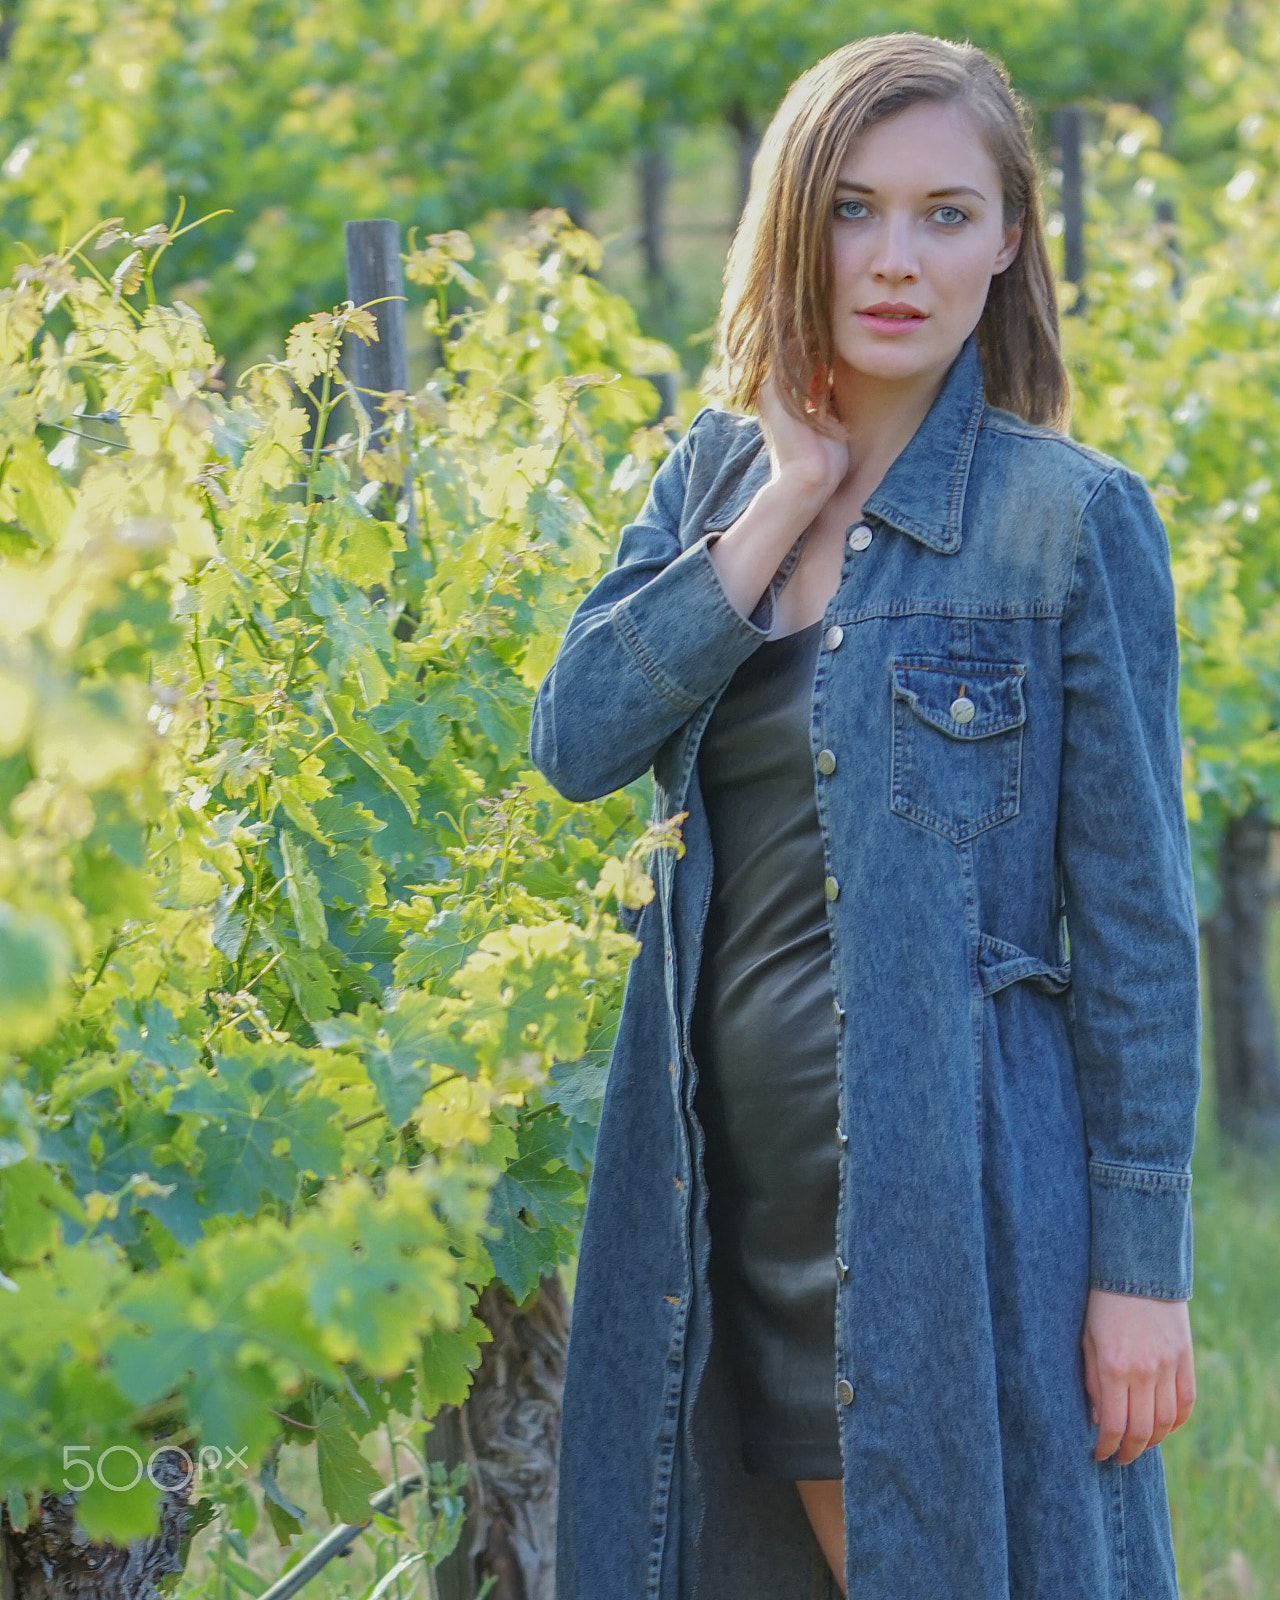 Sony a7R sample photo. Look what i found in the vineyard photography